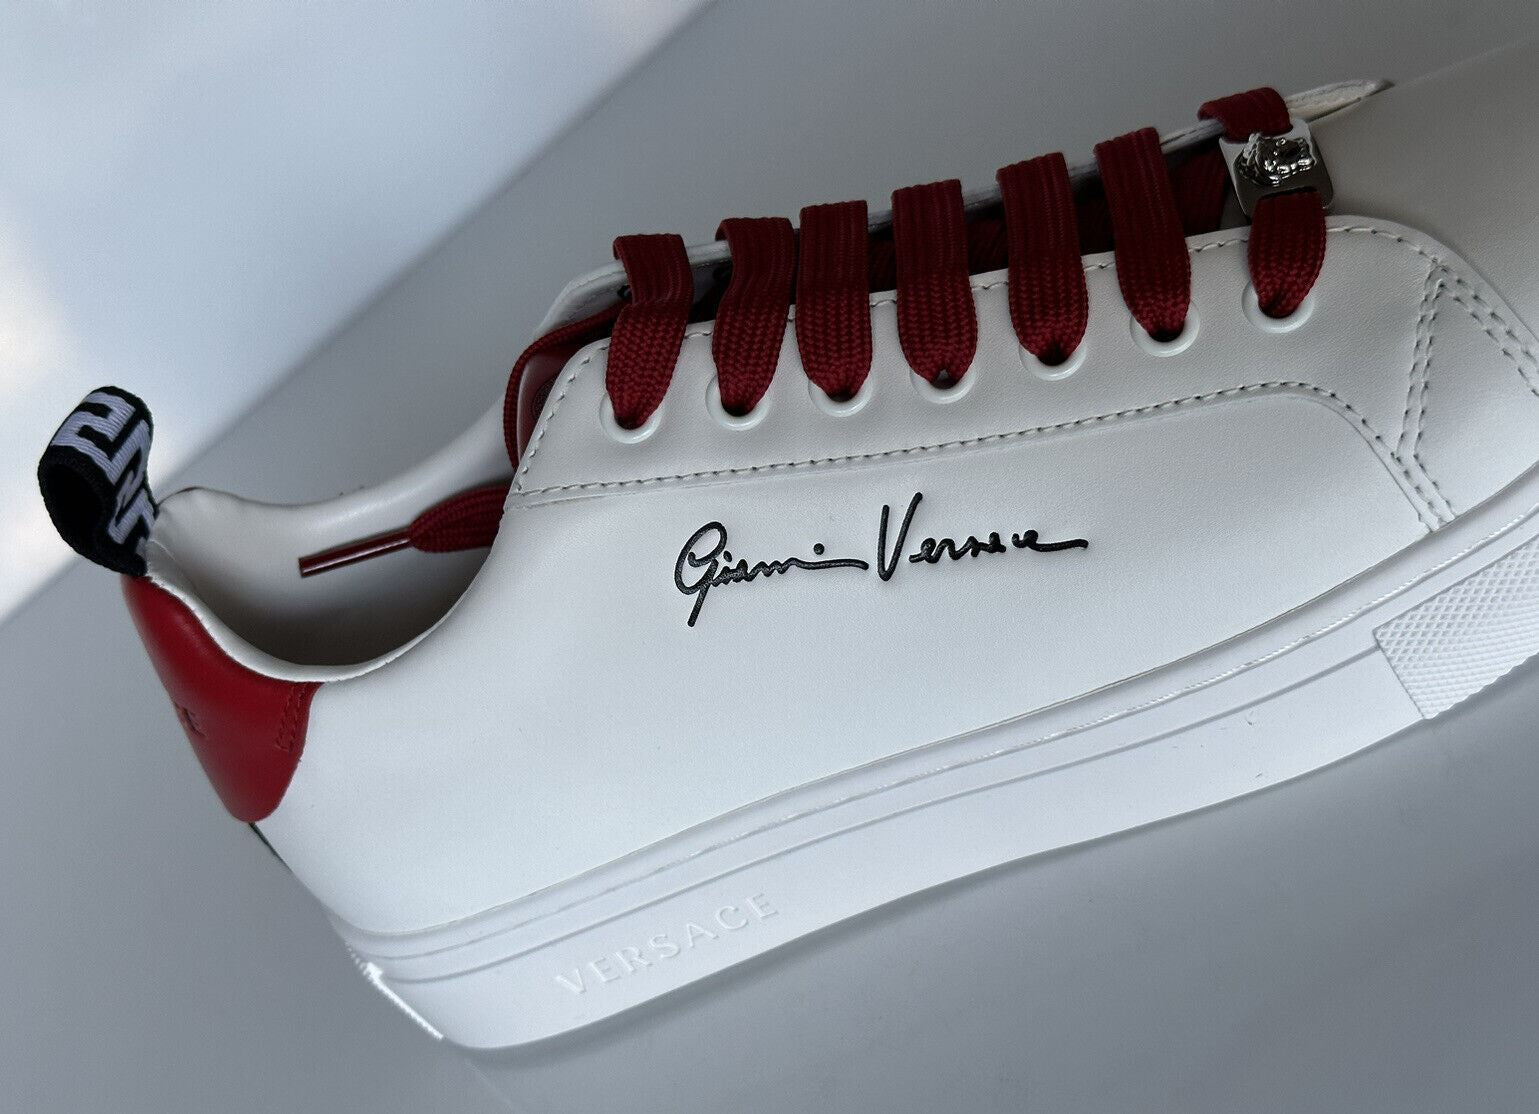 NIB $750 Versace Low Top White/Red Leather Sneakers 9.5 US (39.5 Euro) 1002773